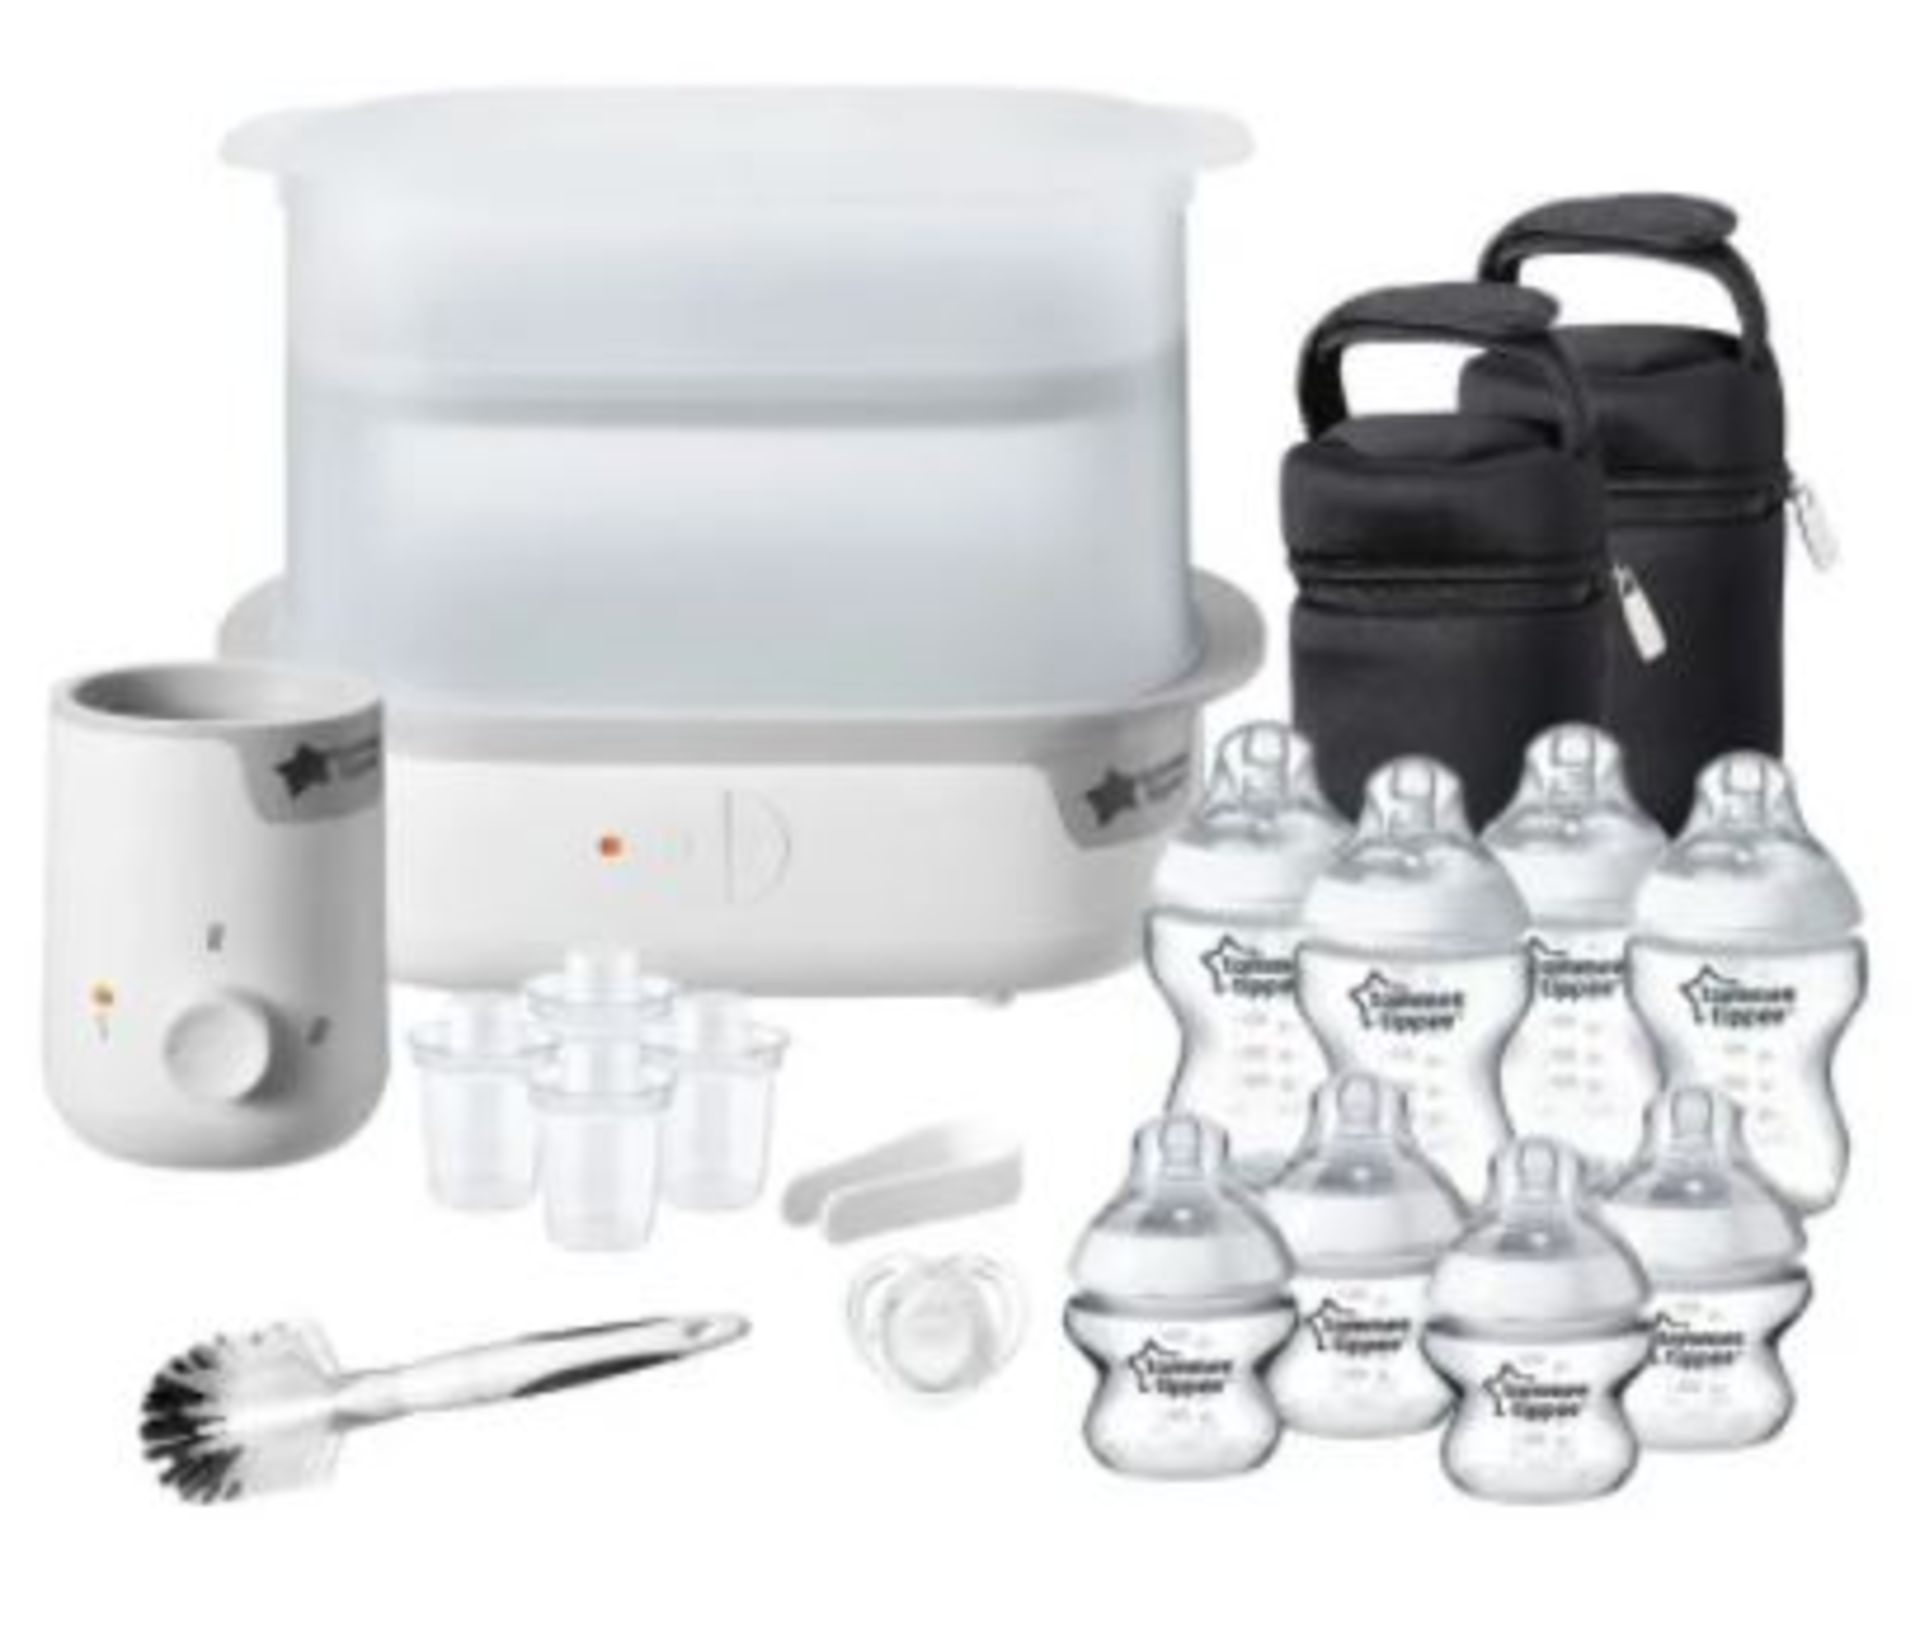 (R6C) Baby. 1 X Tommee Tippee Closer To Nature Complete Feeding Set. RRP £74.99 (New)